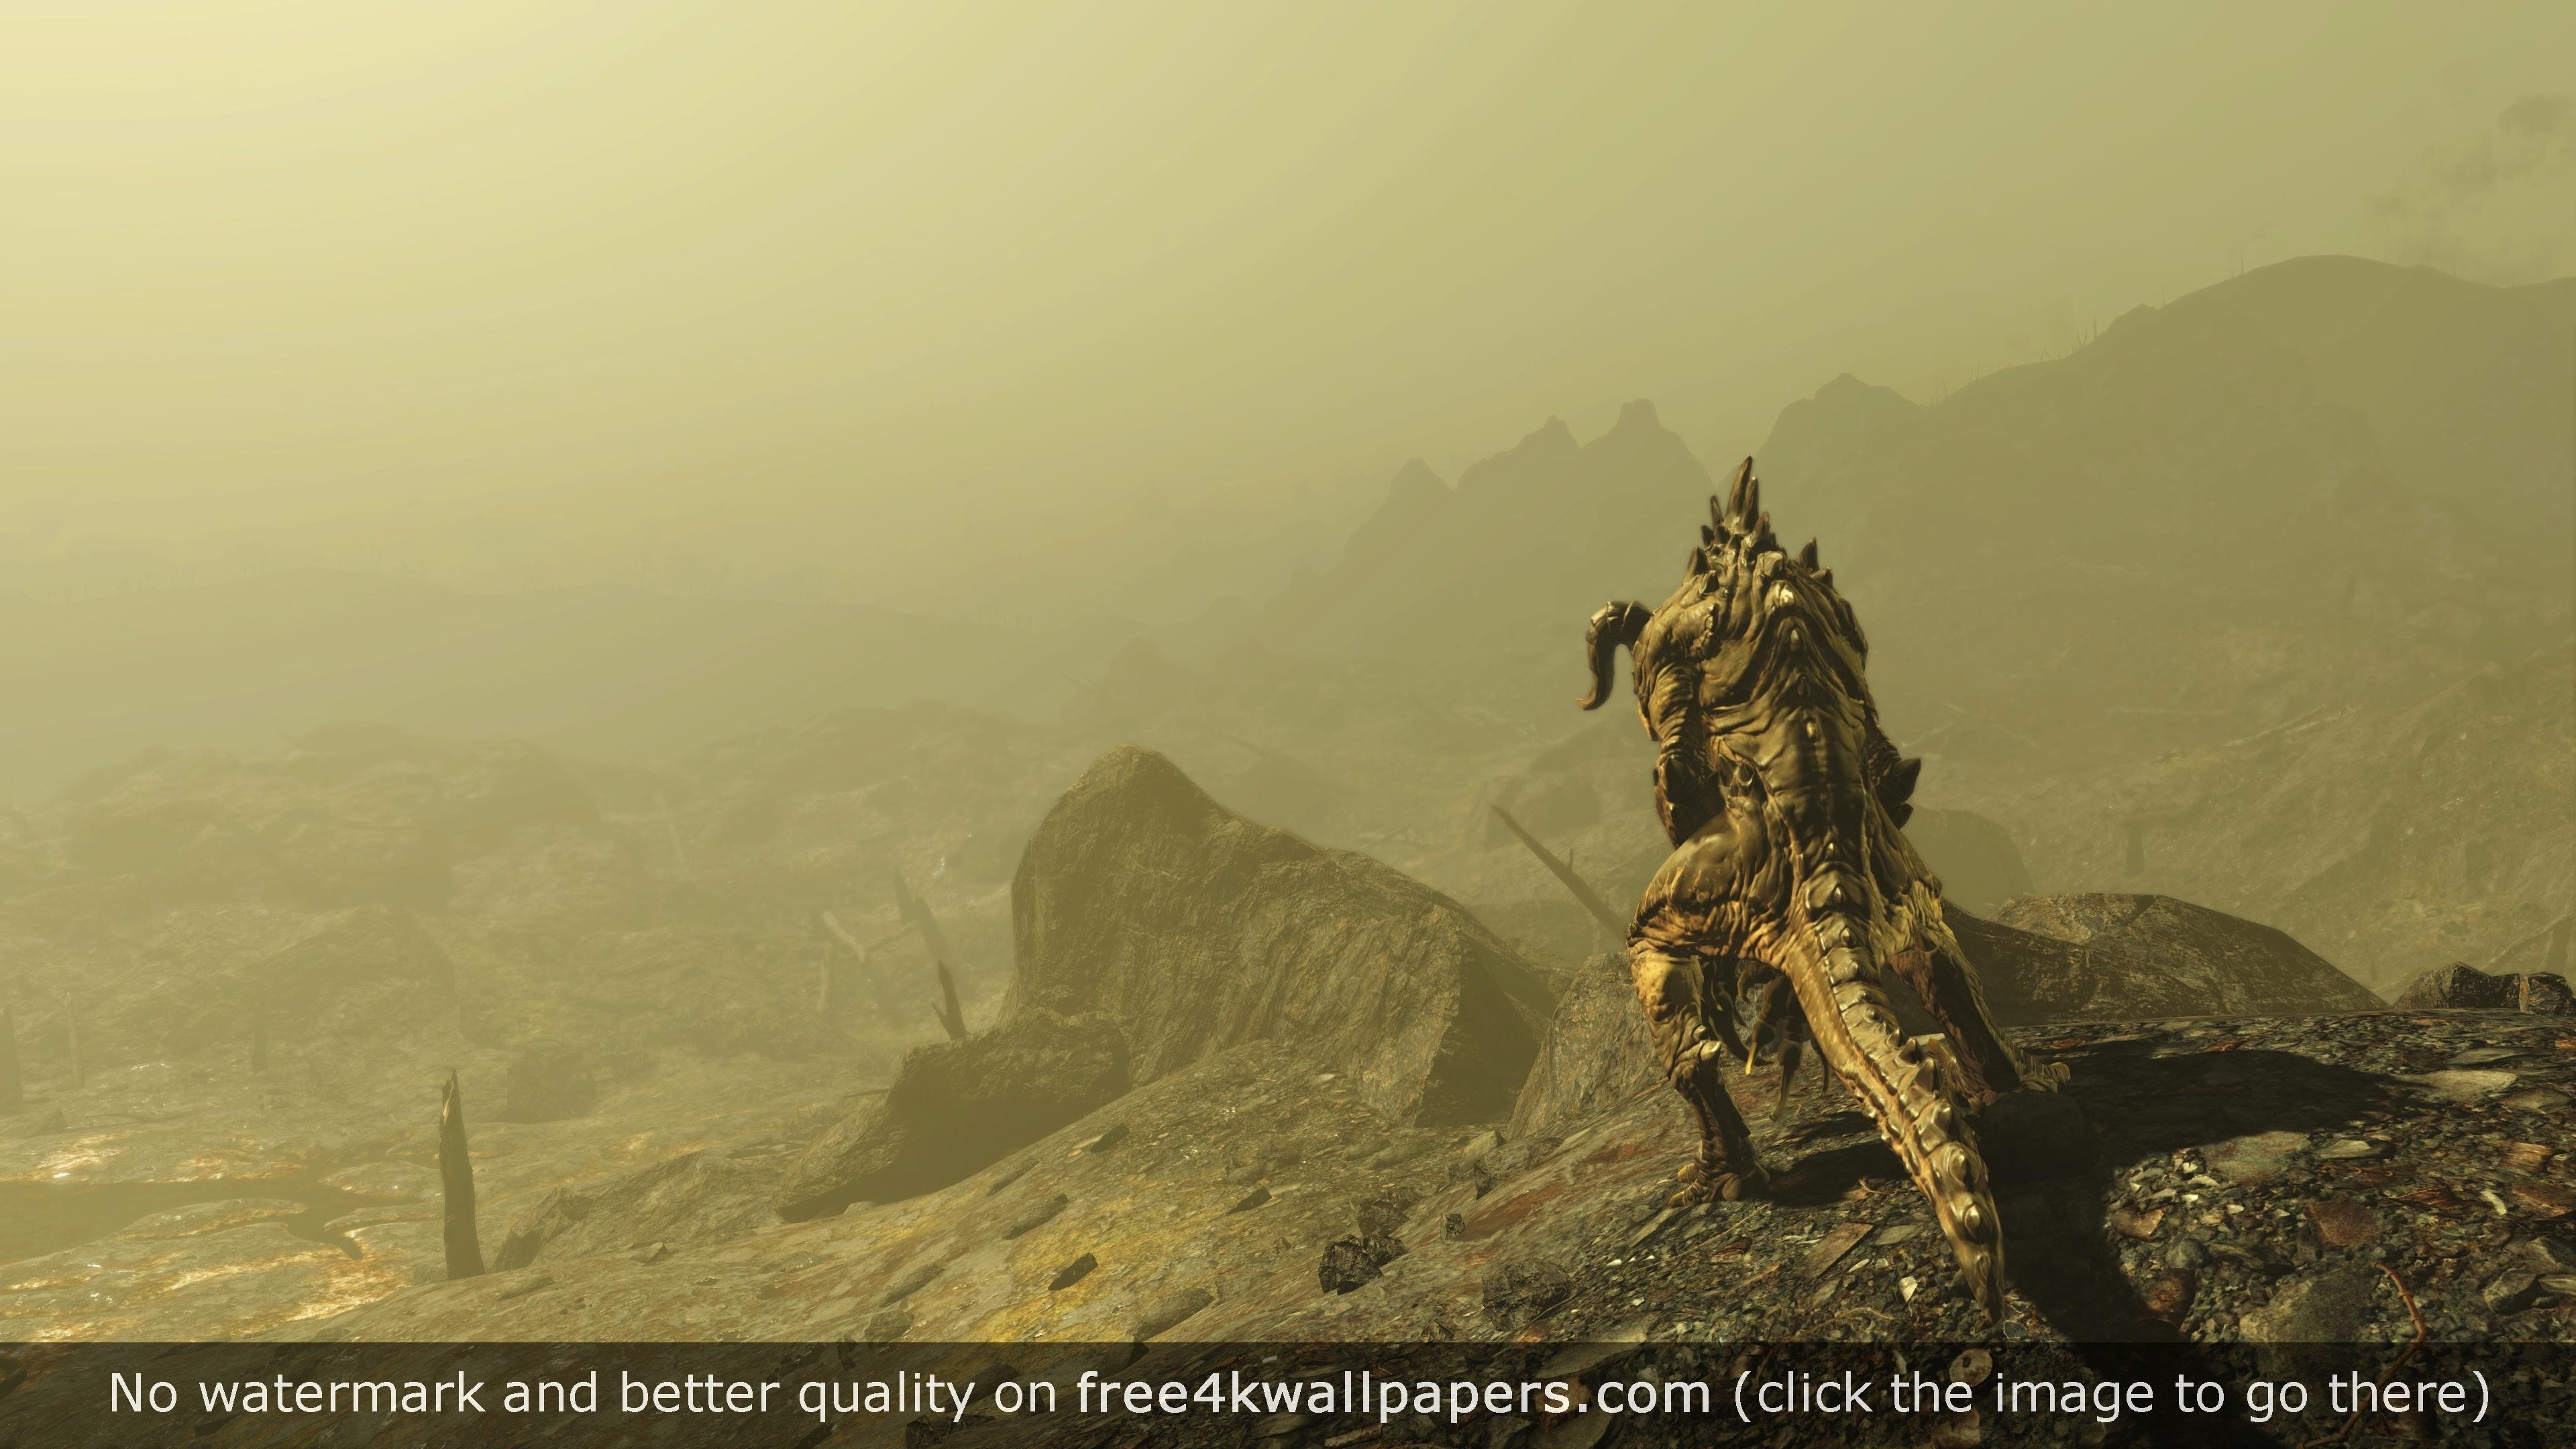 3840x2160 Fallout Deathclaw wallpaper https://free4kwallpapers.com/wallpaper/games/ fallout